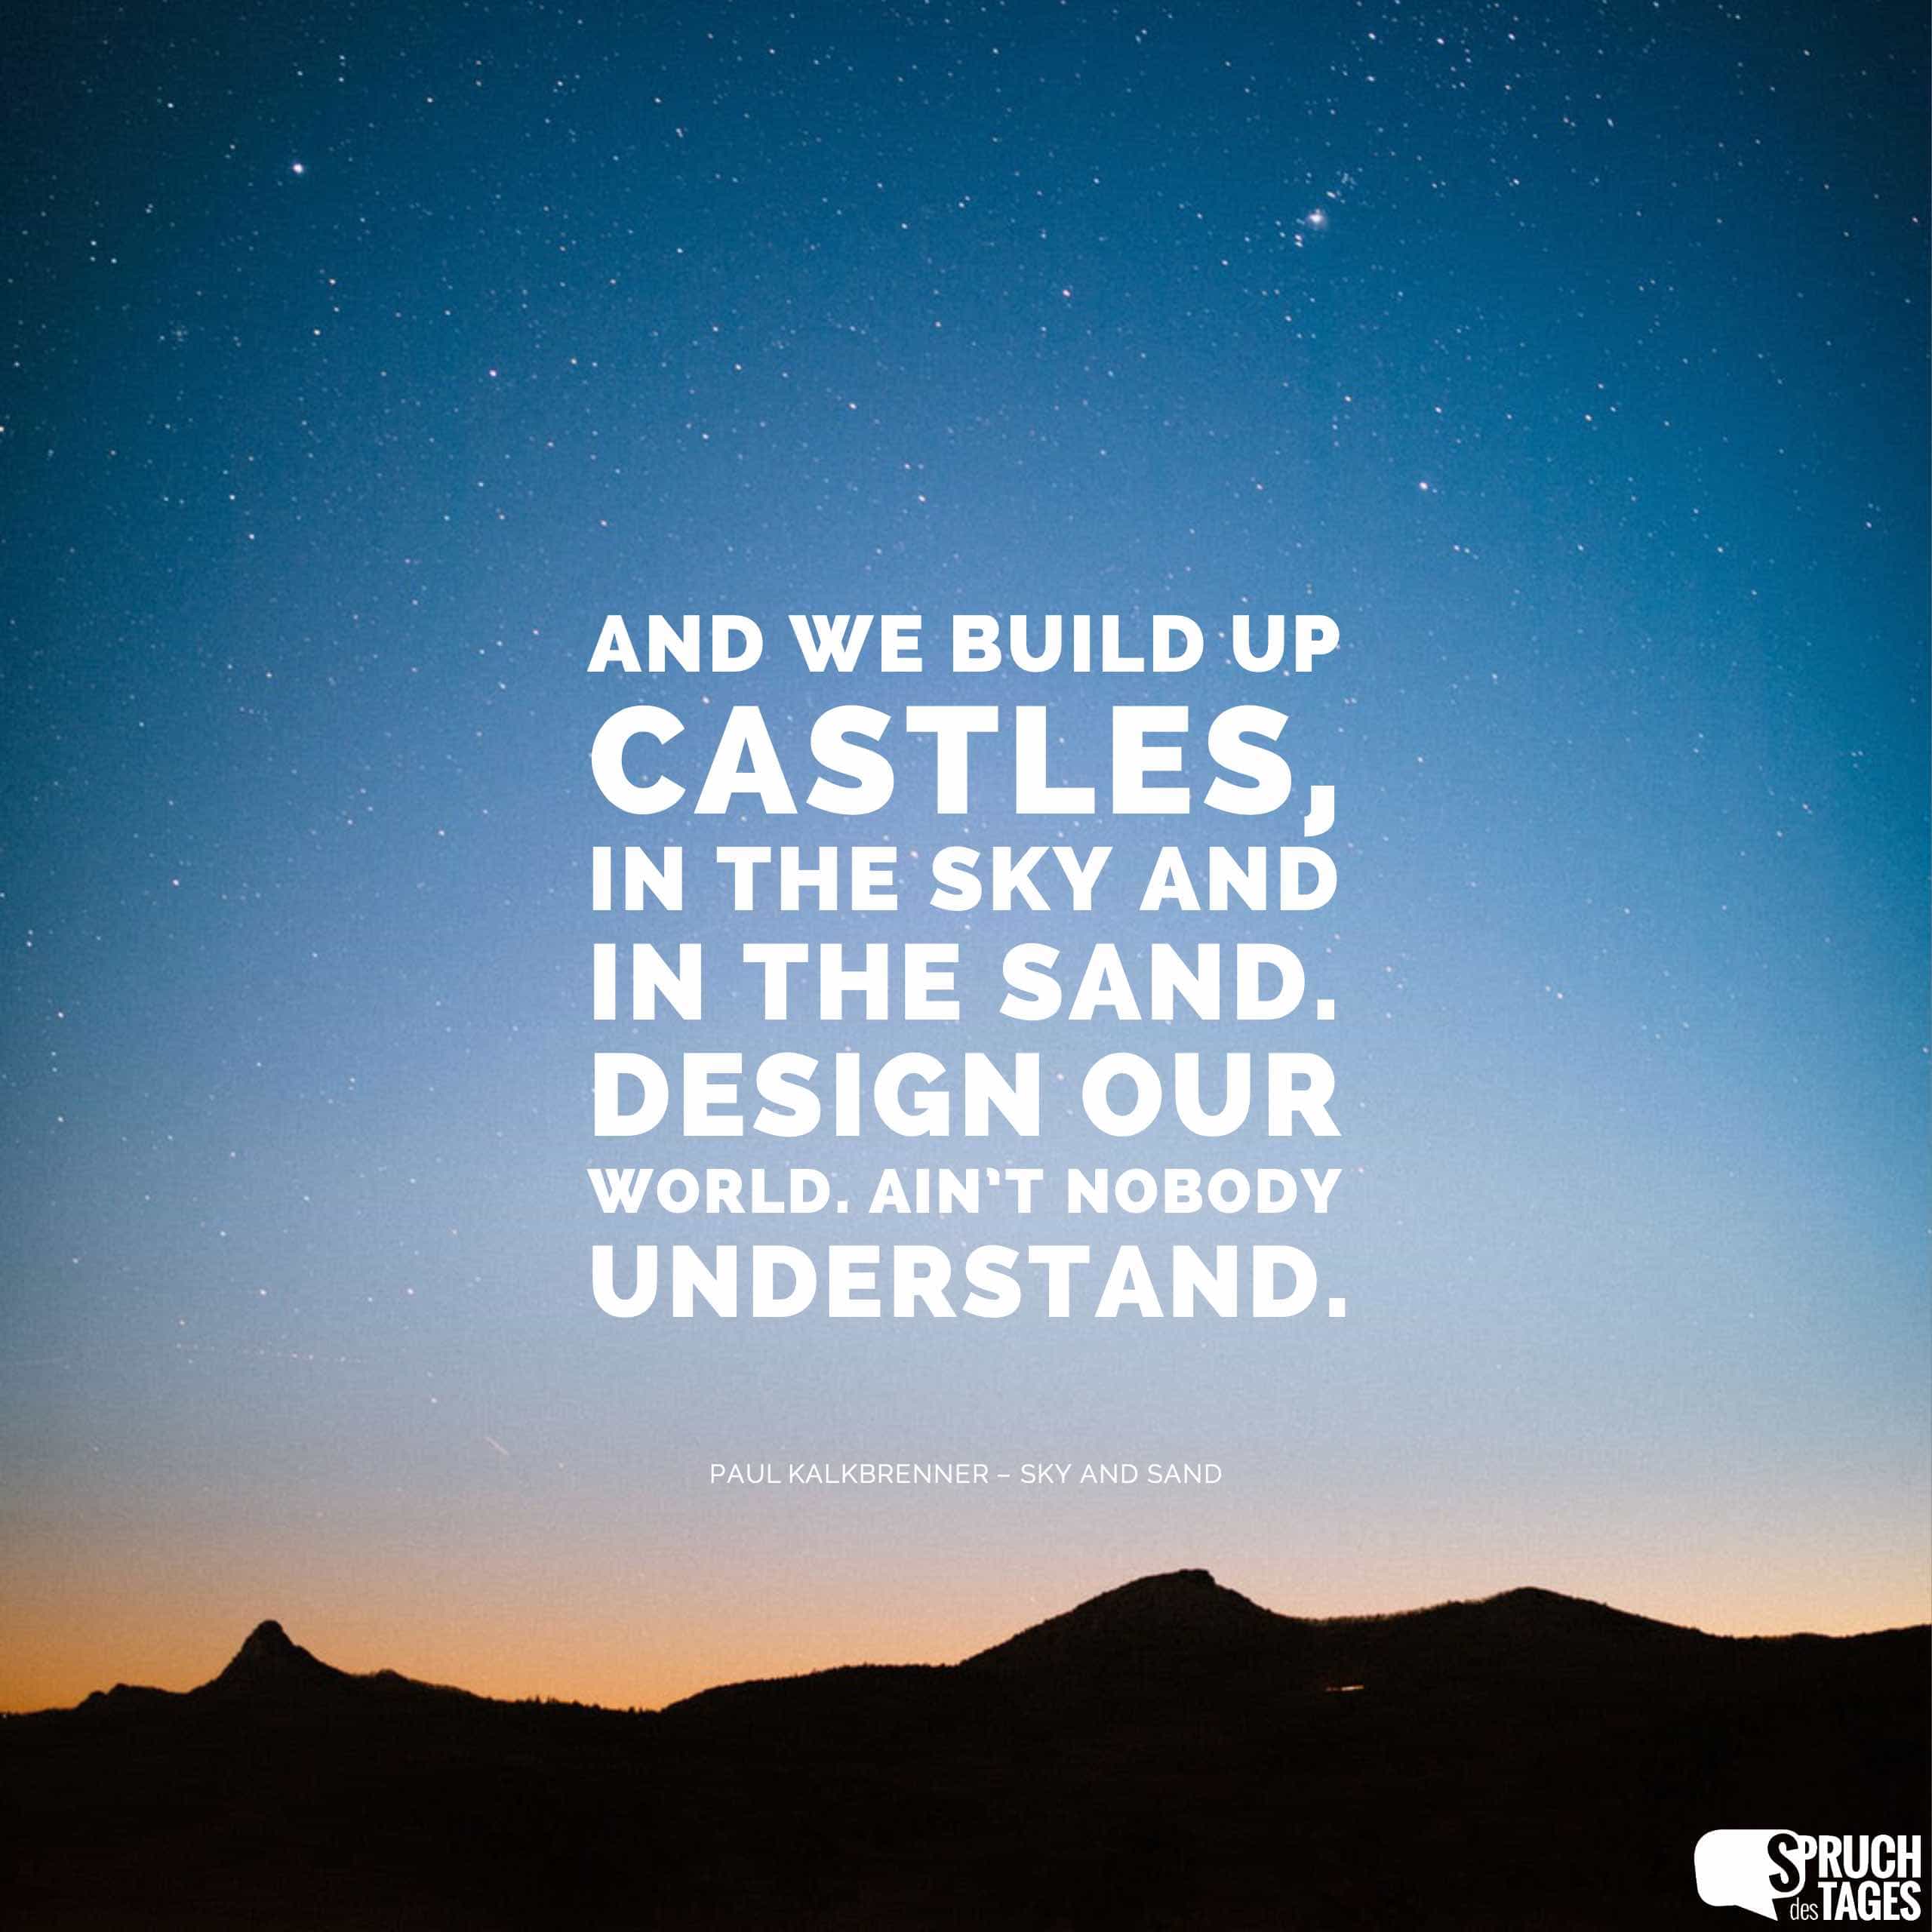 And we build up castles, in the sky and in the sand. Design our world. Ain’t nobody understand.